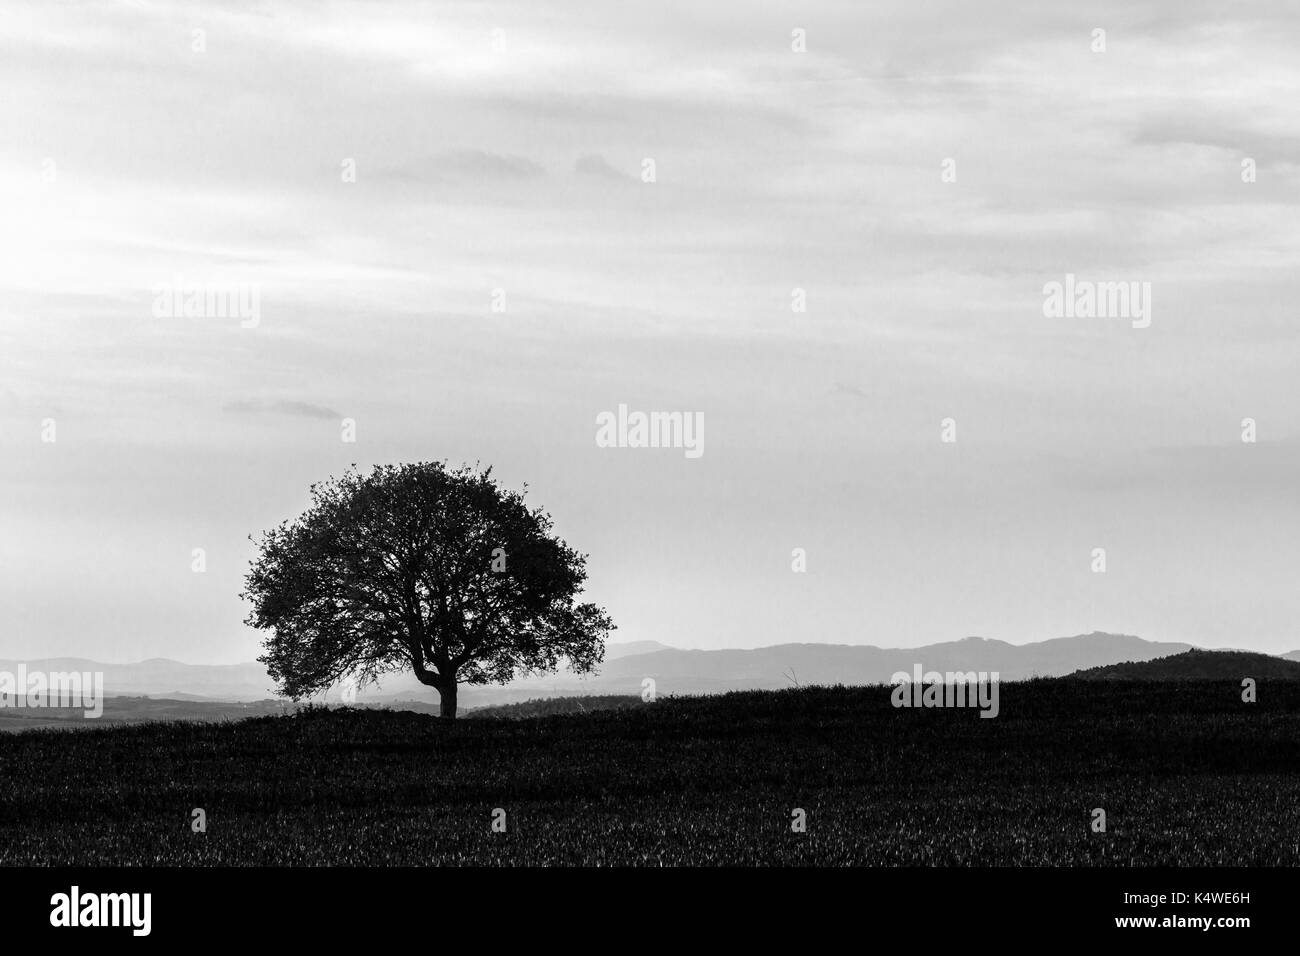 Tuscany landscape, with an isolated tree on a meadow Stock Photo